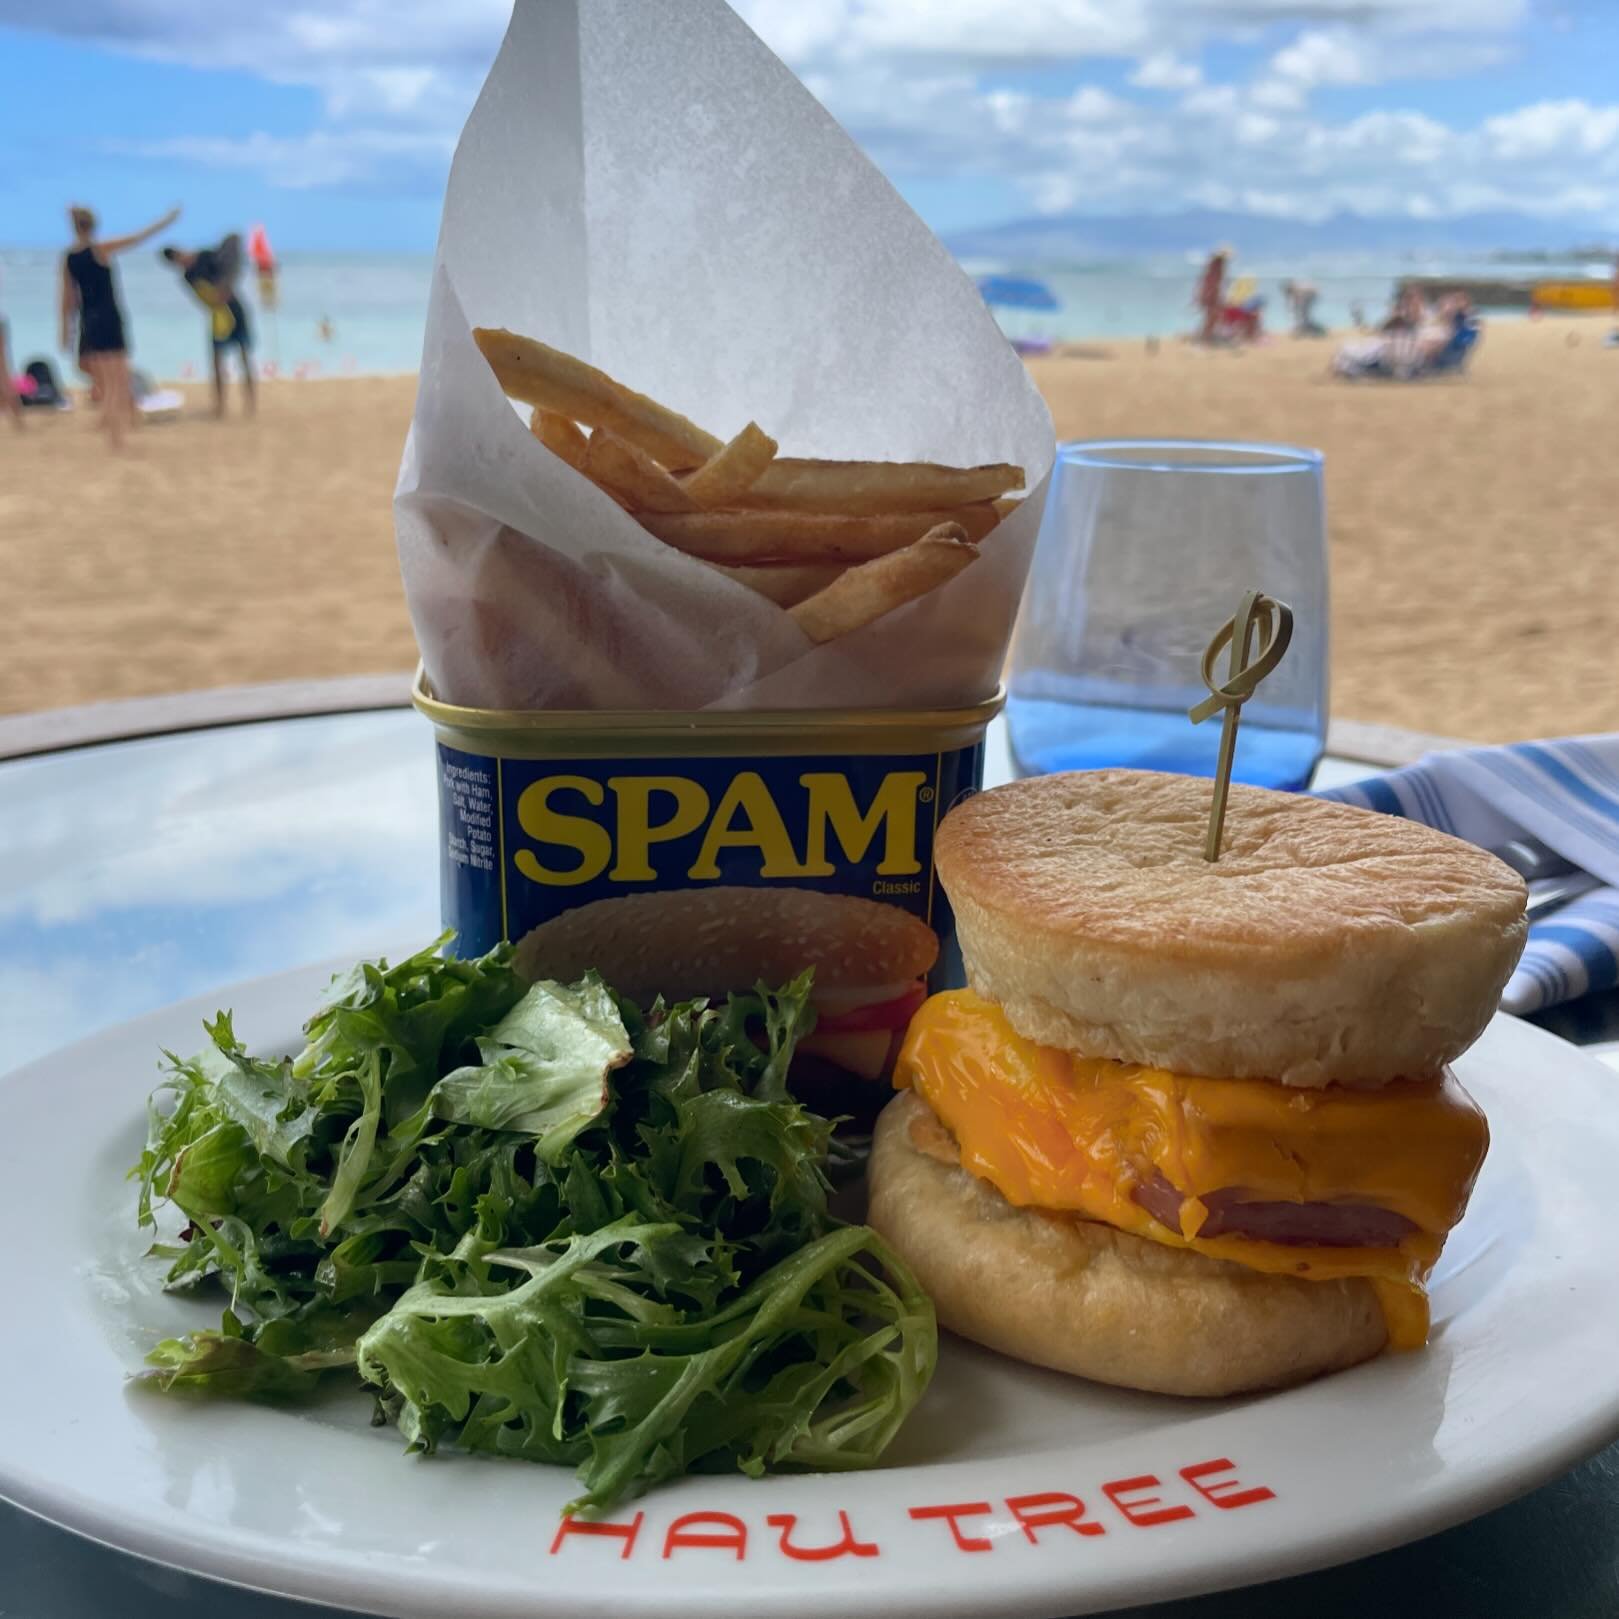 Our final weekend of the festival. Stop by 15 different Waikiki restaurants such as @thehautree in the @kaimanabeach for exclusive SPAM dishes only available until Sunday. Complete restaurant listing on our website. Have a SPAM-tastic weekend!